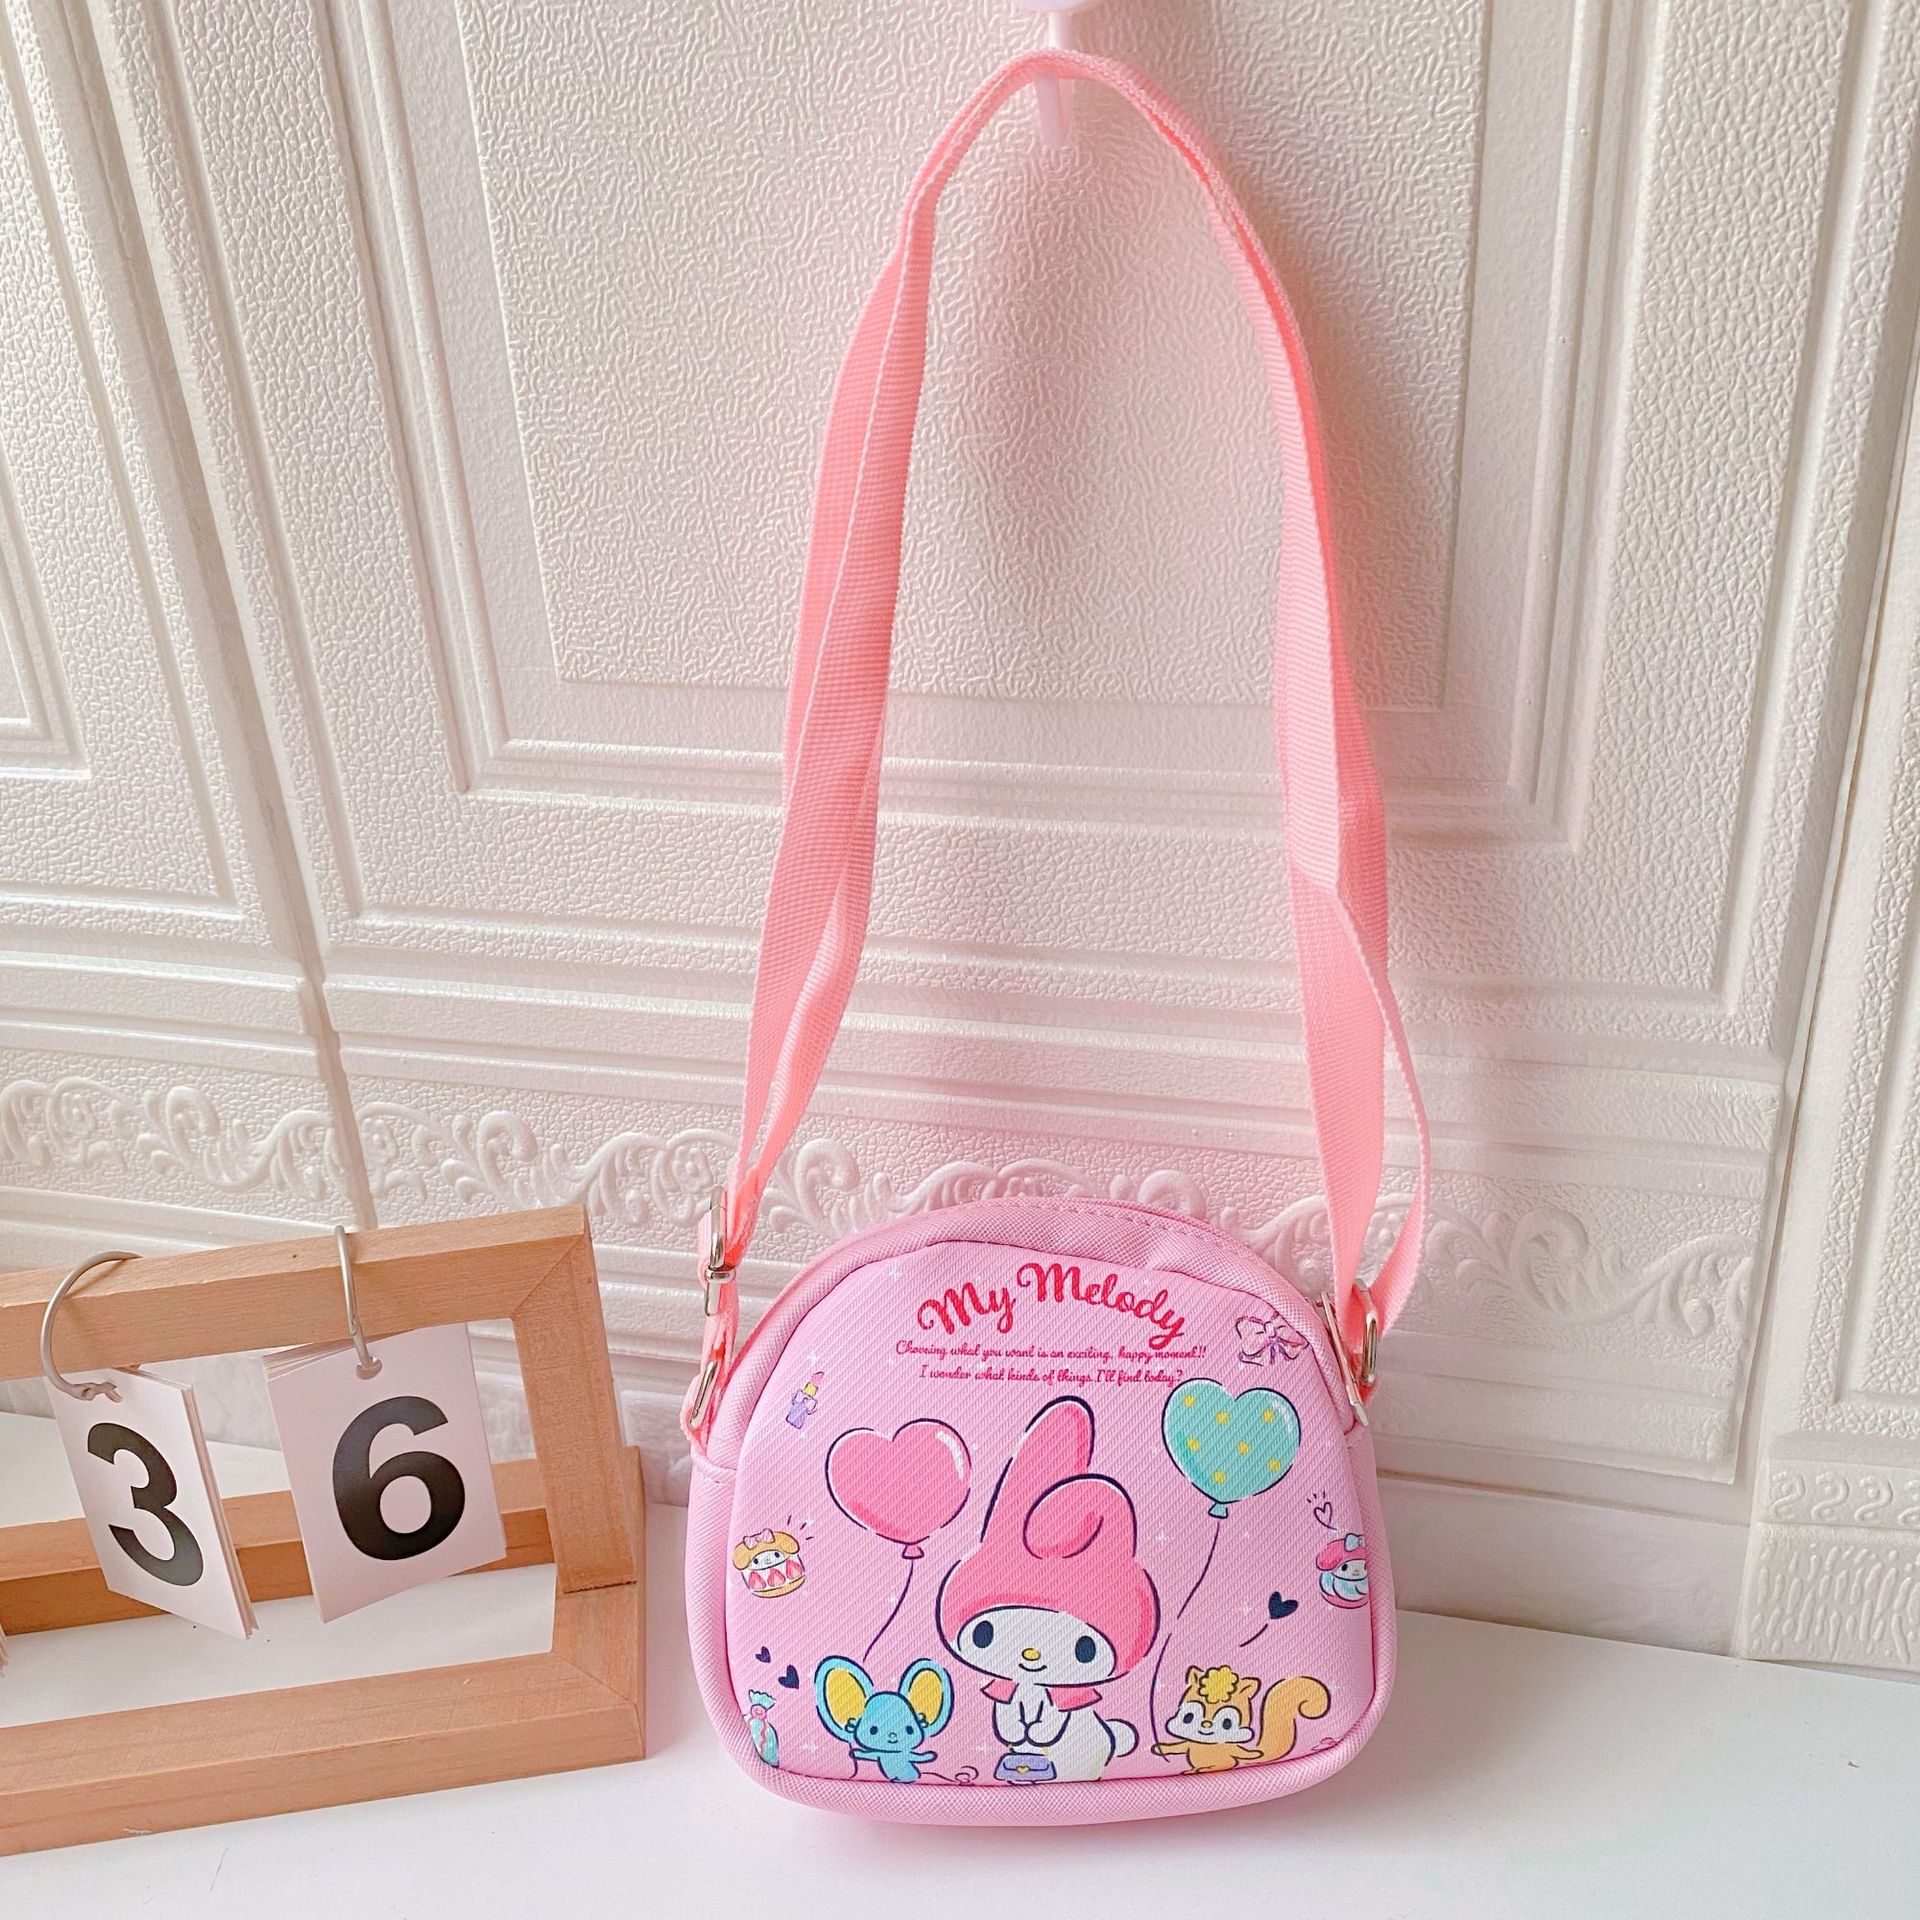 Cartoon Japanese Style Clow M Kid's Messenger Bag out Shoulder Bag Travel Carrying Storage Tissue Change Small Backpack